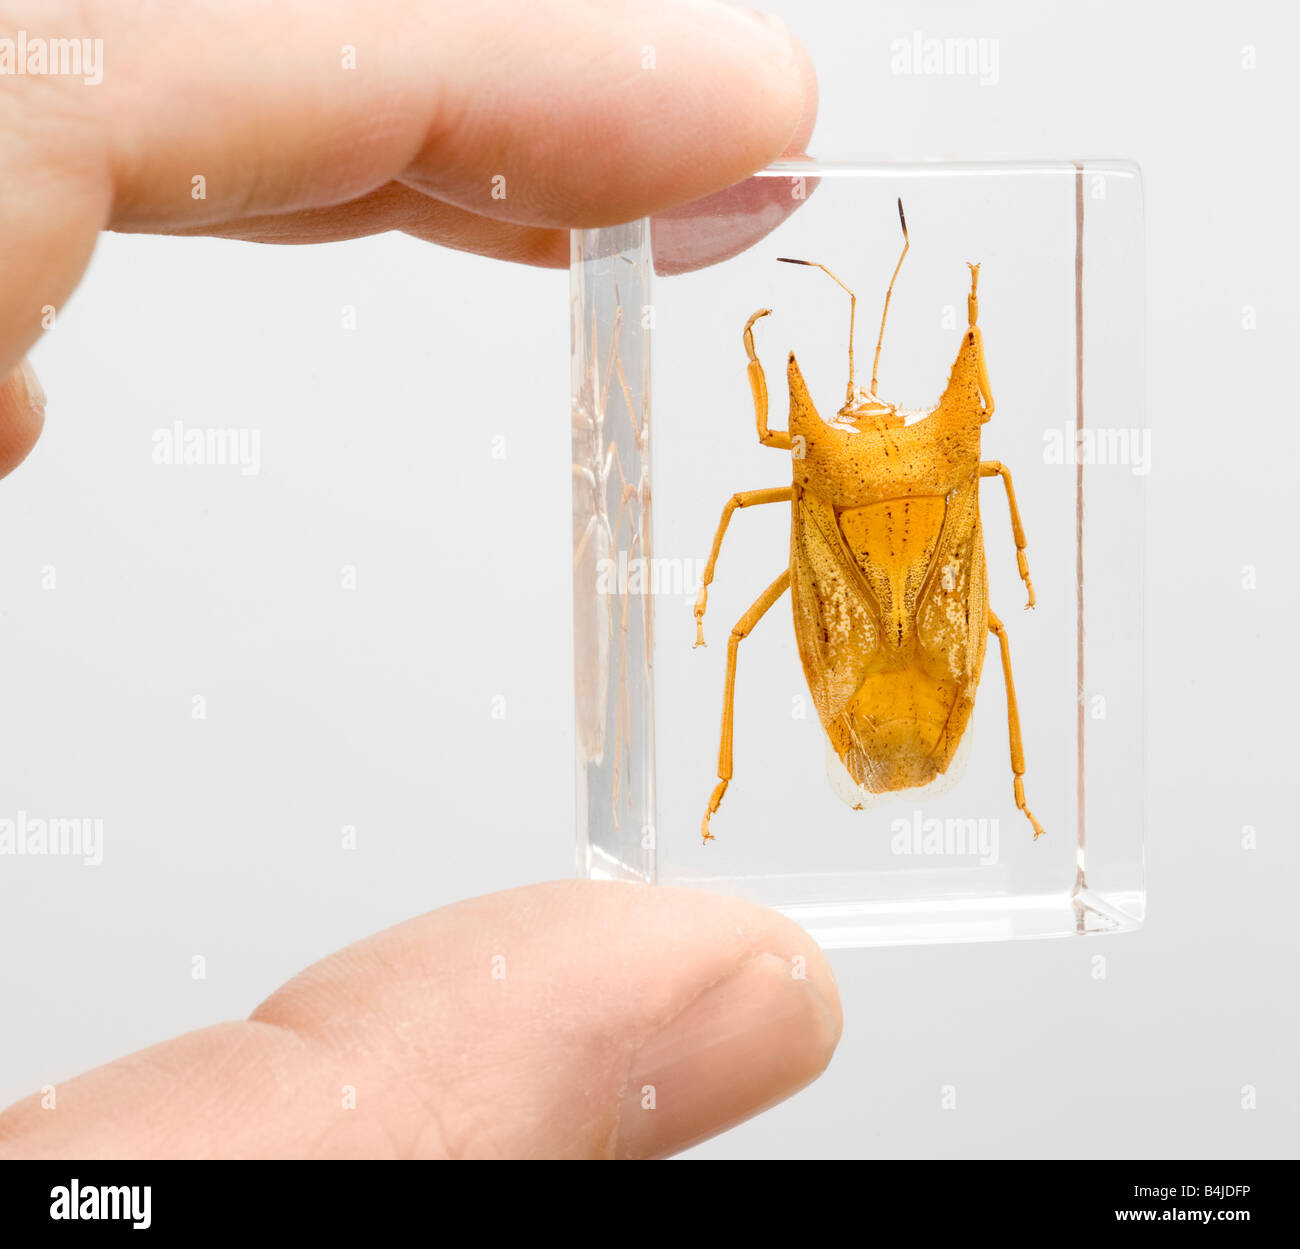 Golden Stink Bug, Cressona divaricata, lucite resin embedded, shield bug from China Stock Photo